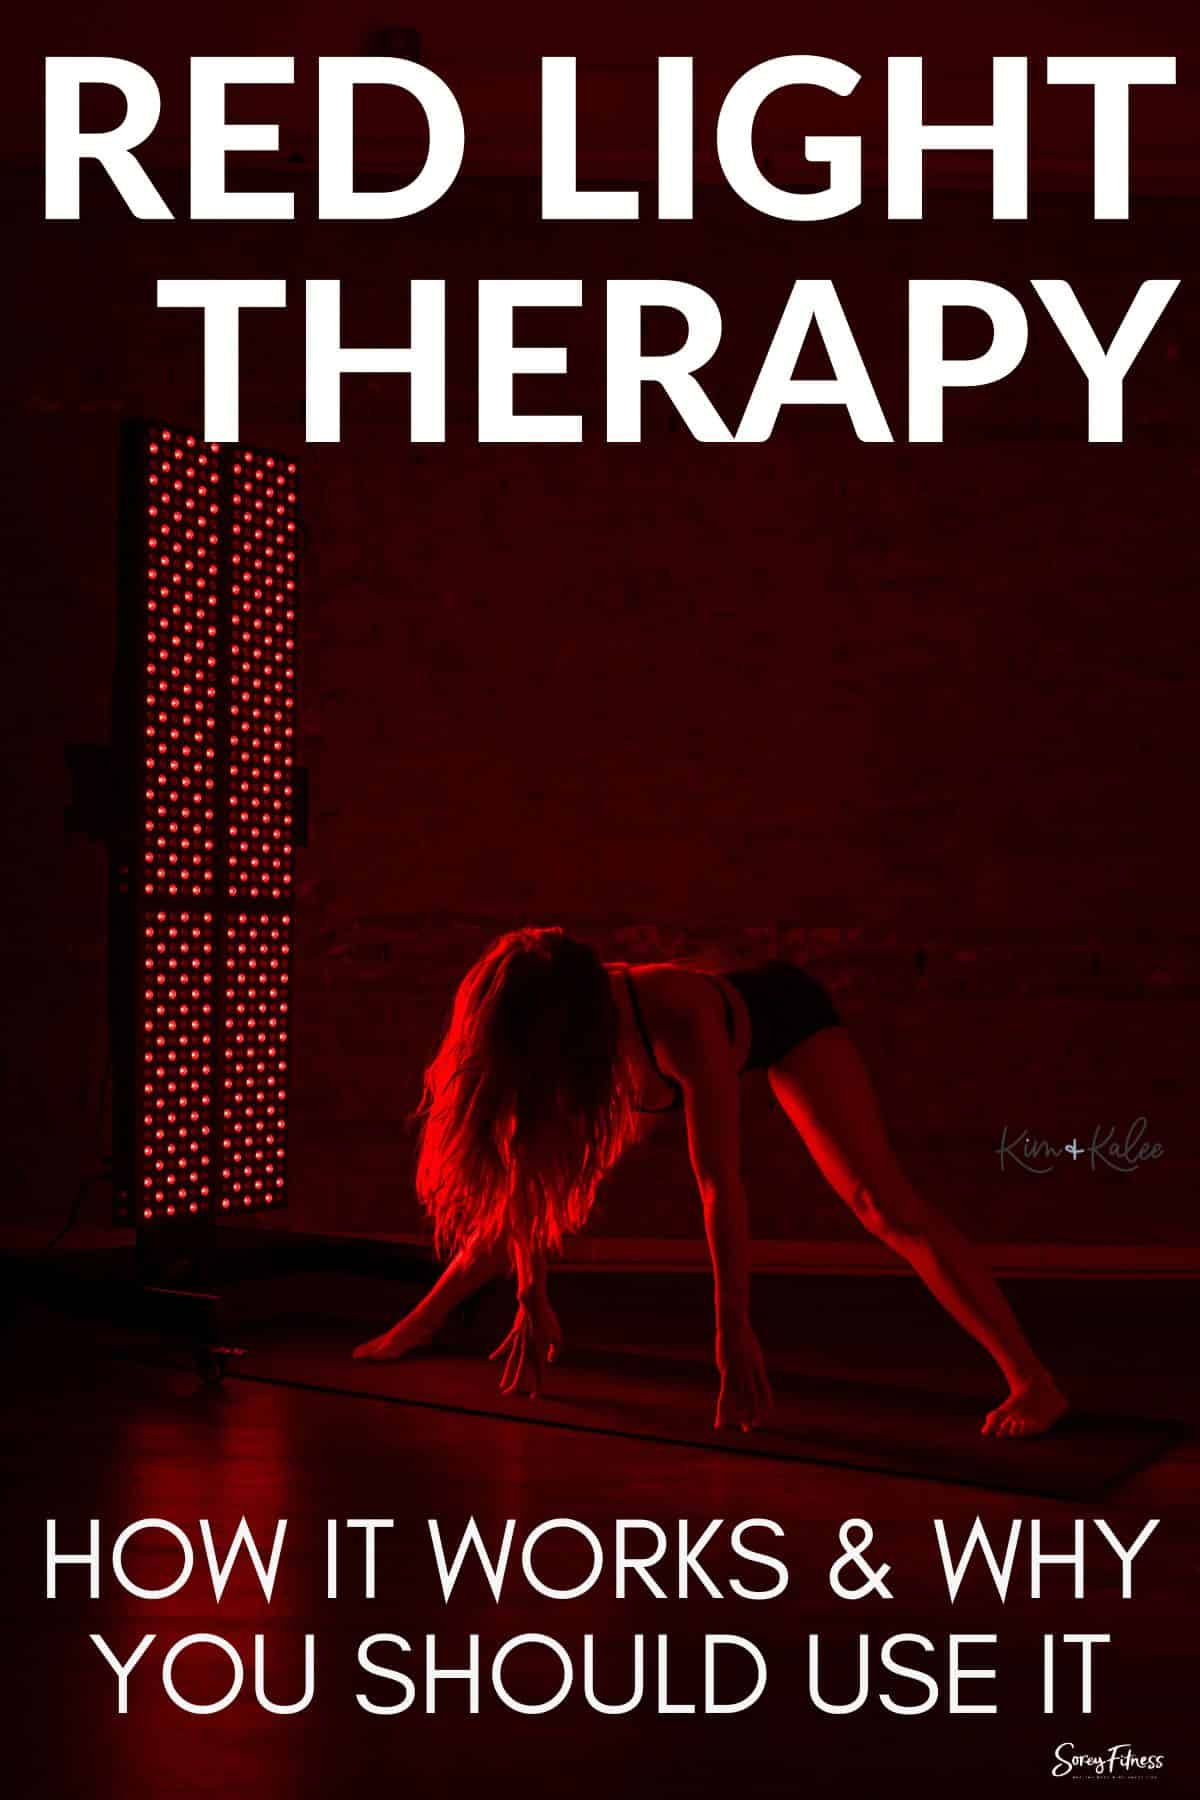 woman stretching beside a full body panel - text overlay says "red light therapy how it works and why you should use it"